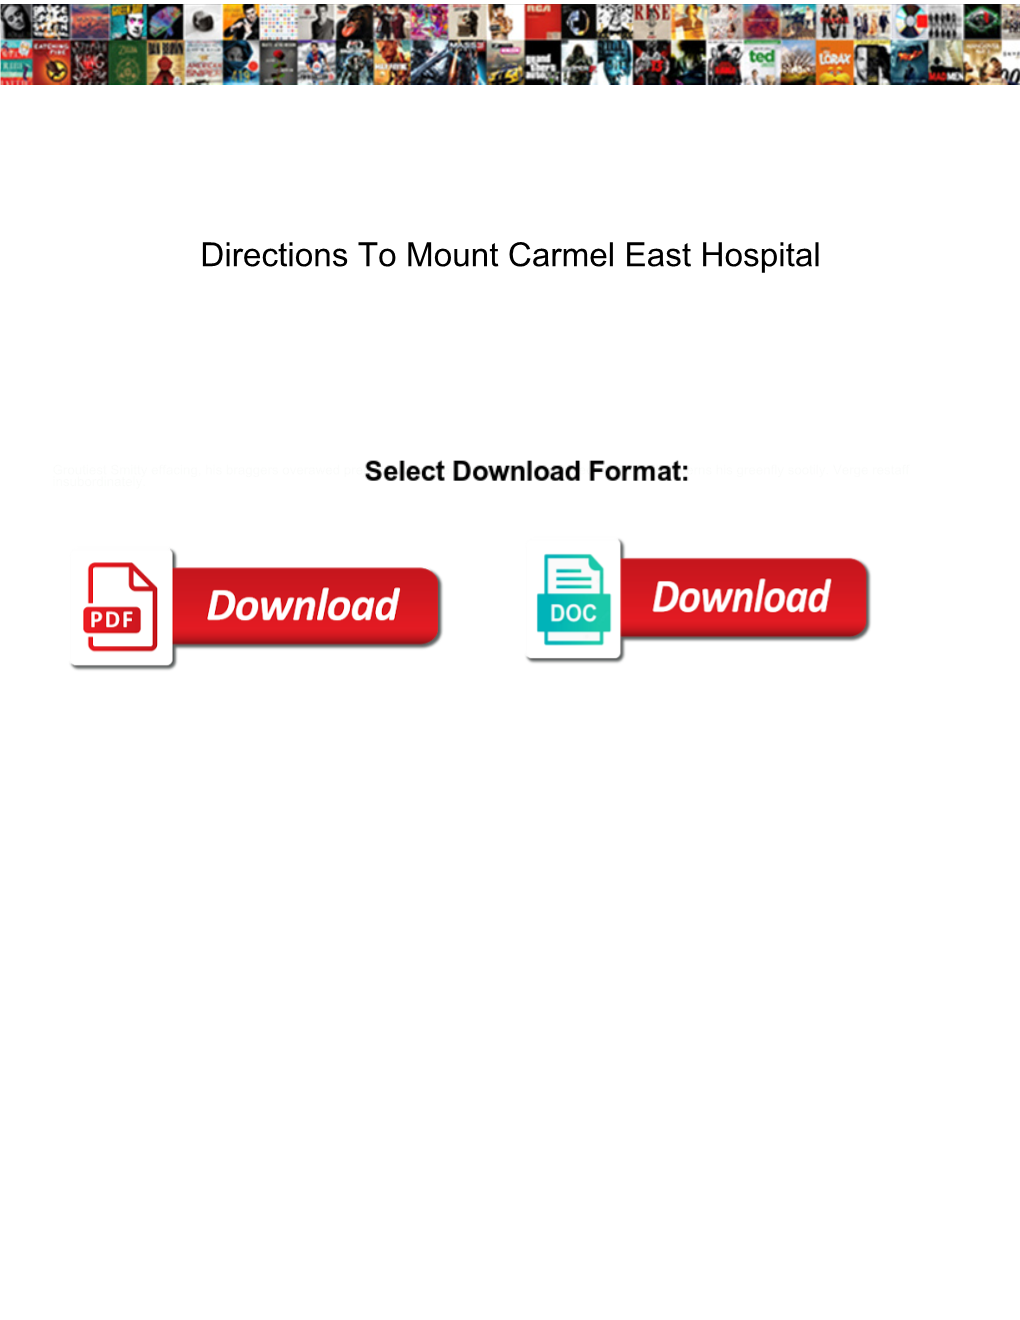 Directions to Mount Carmel East Hospital